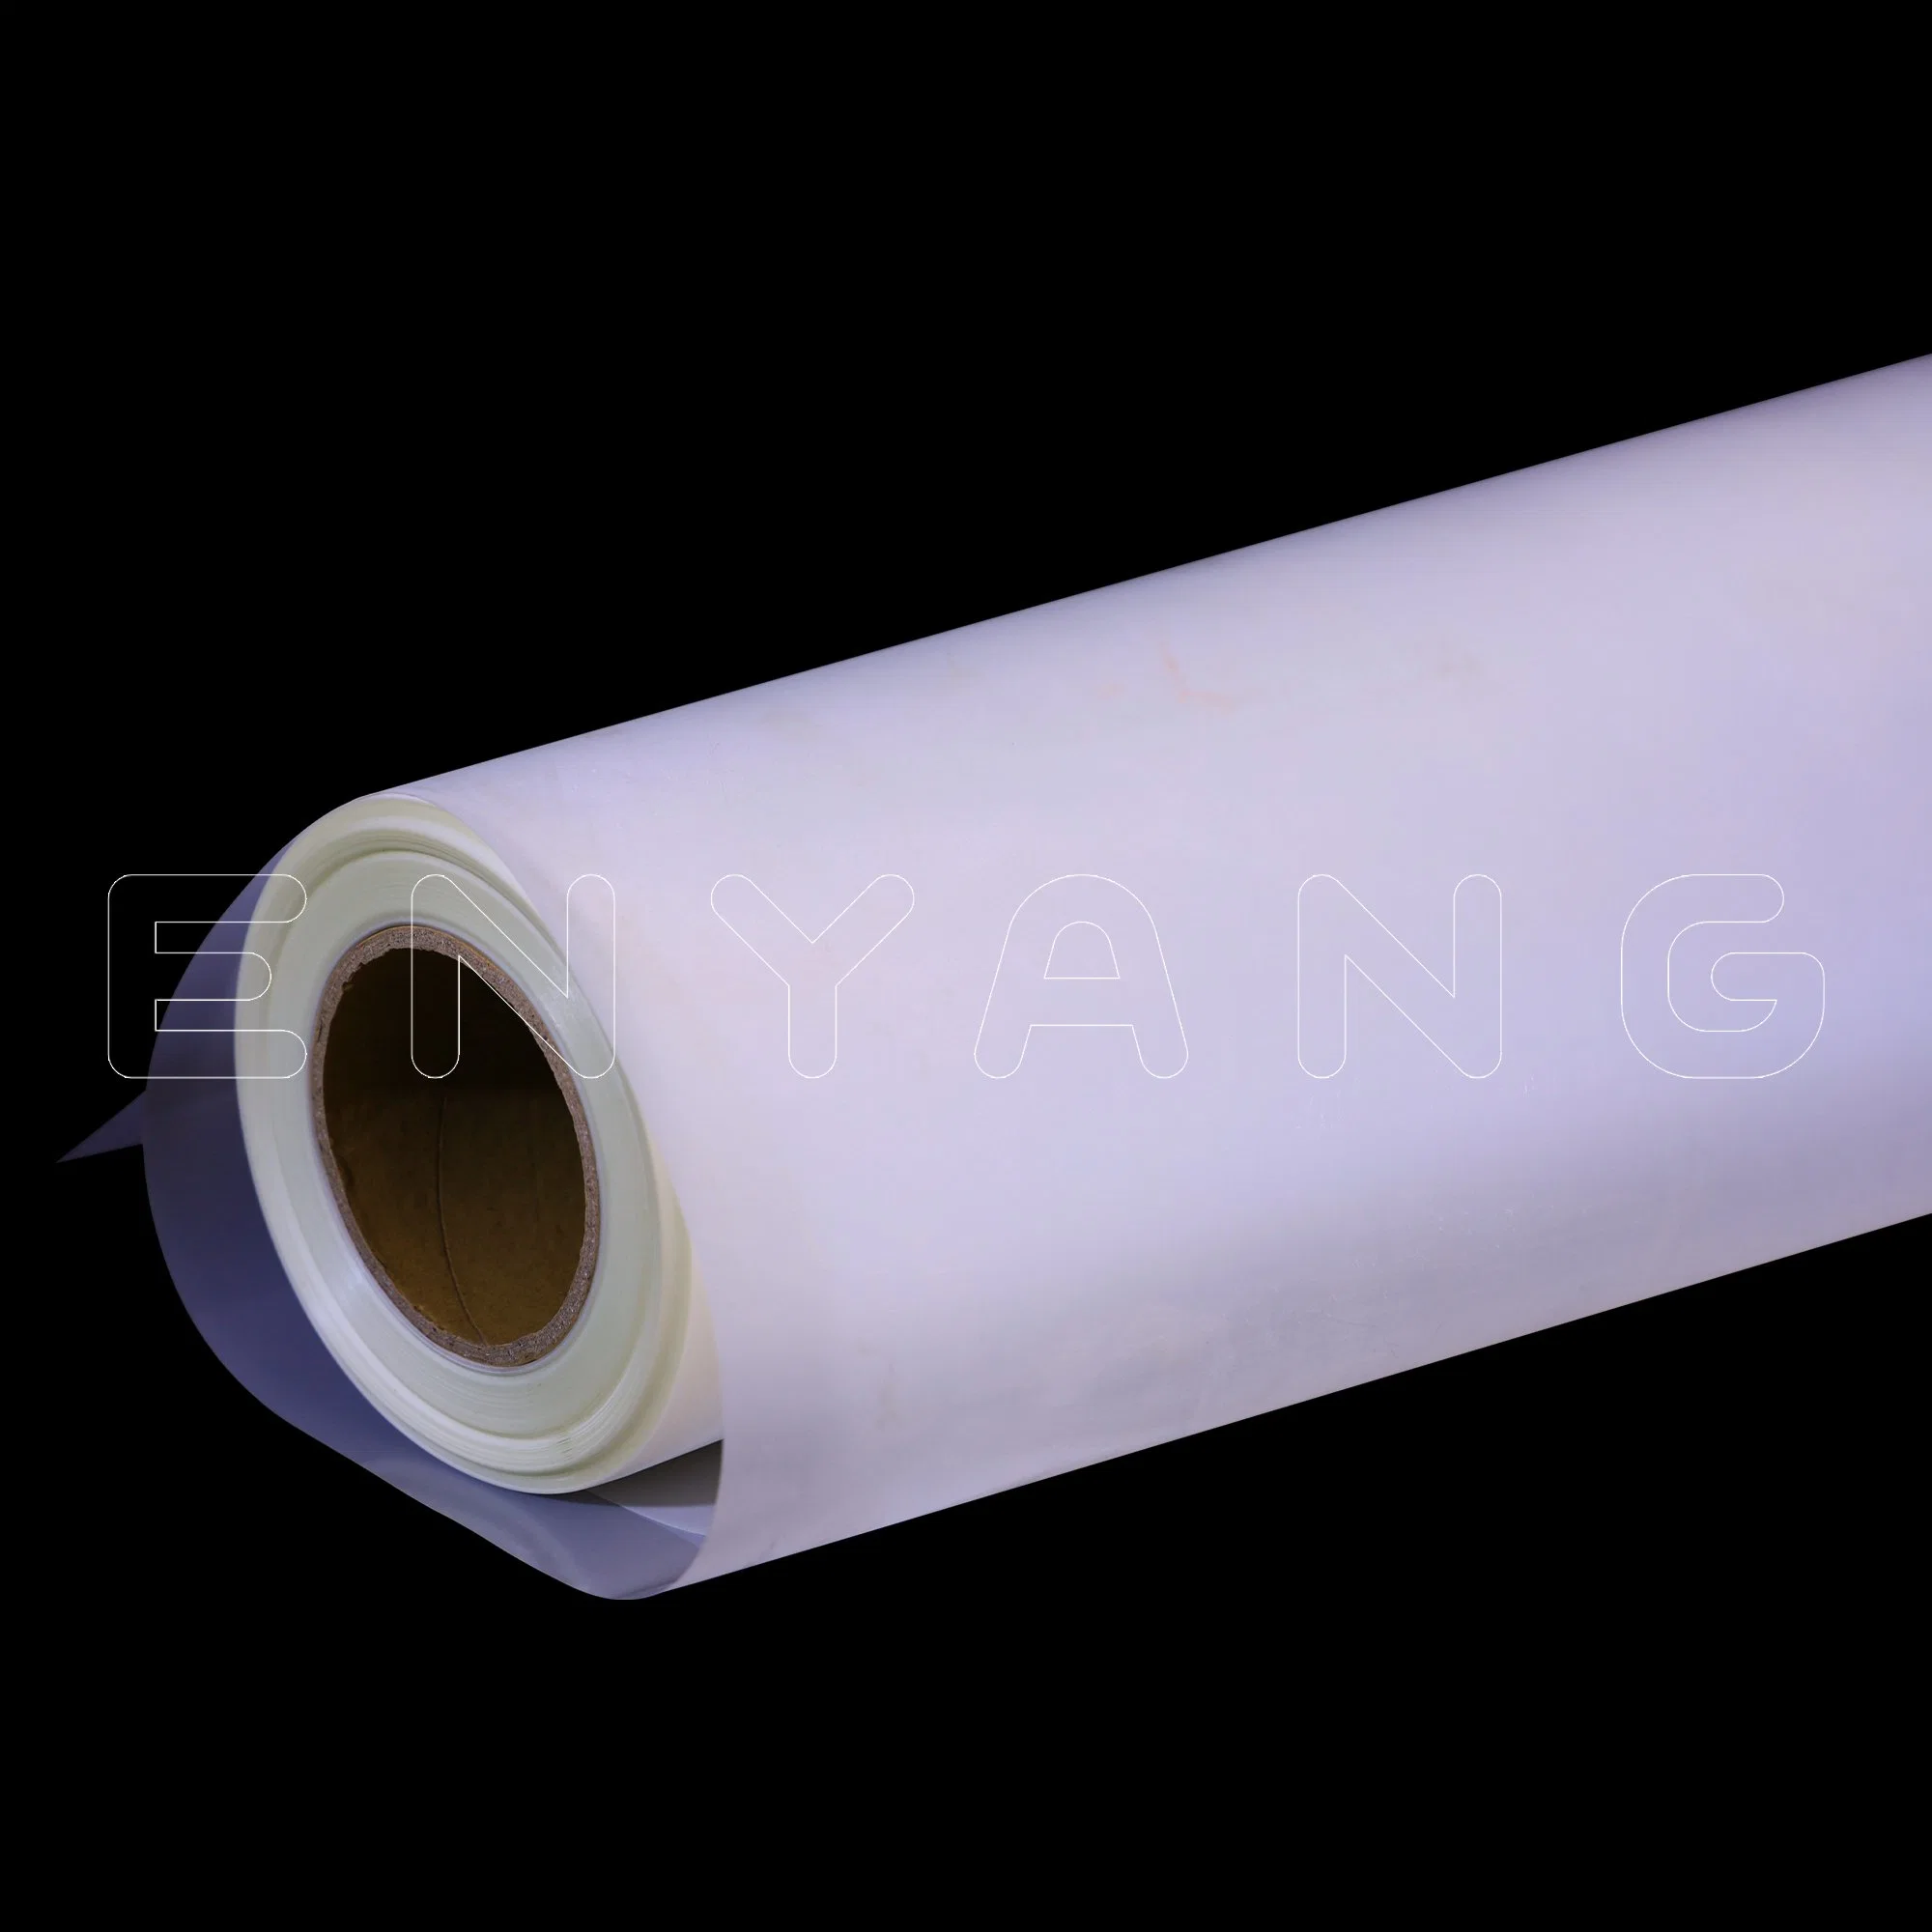 Hot Peel Dtf Film Roll A3 Printing Materials for Dtf Transfer Film Sheets